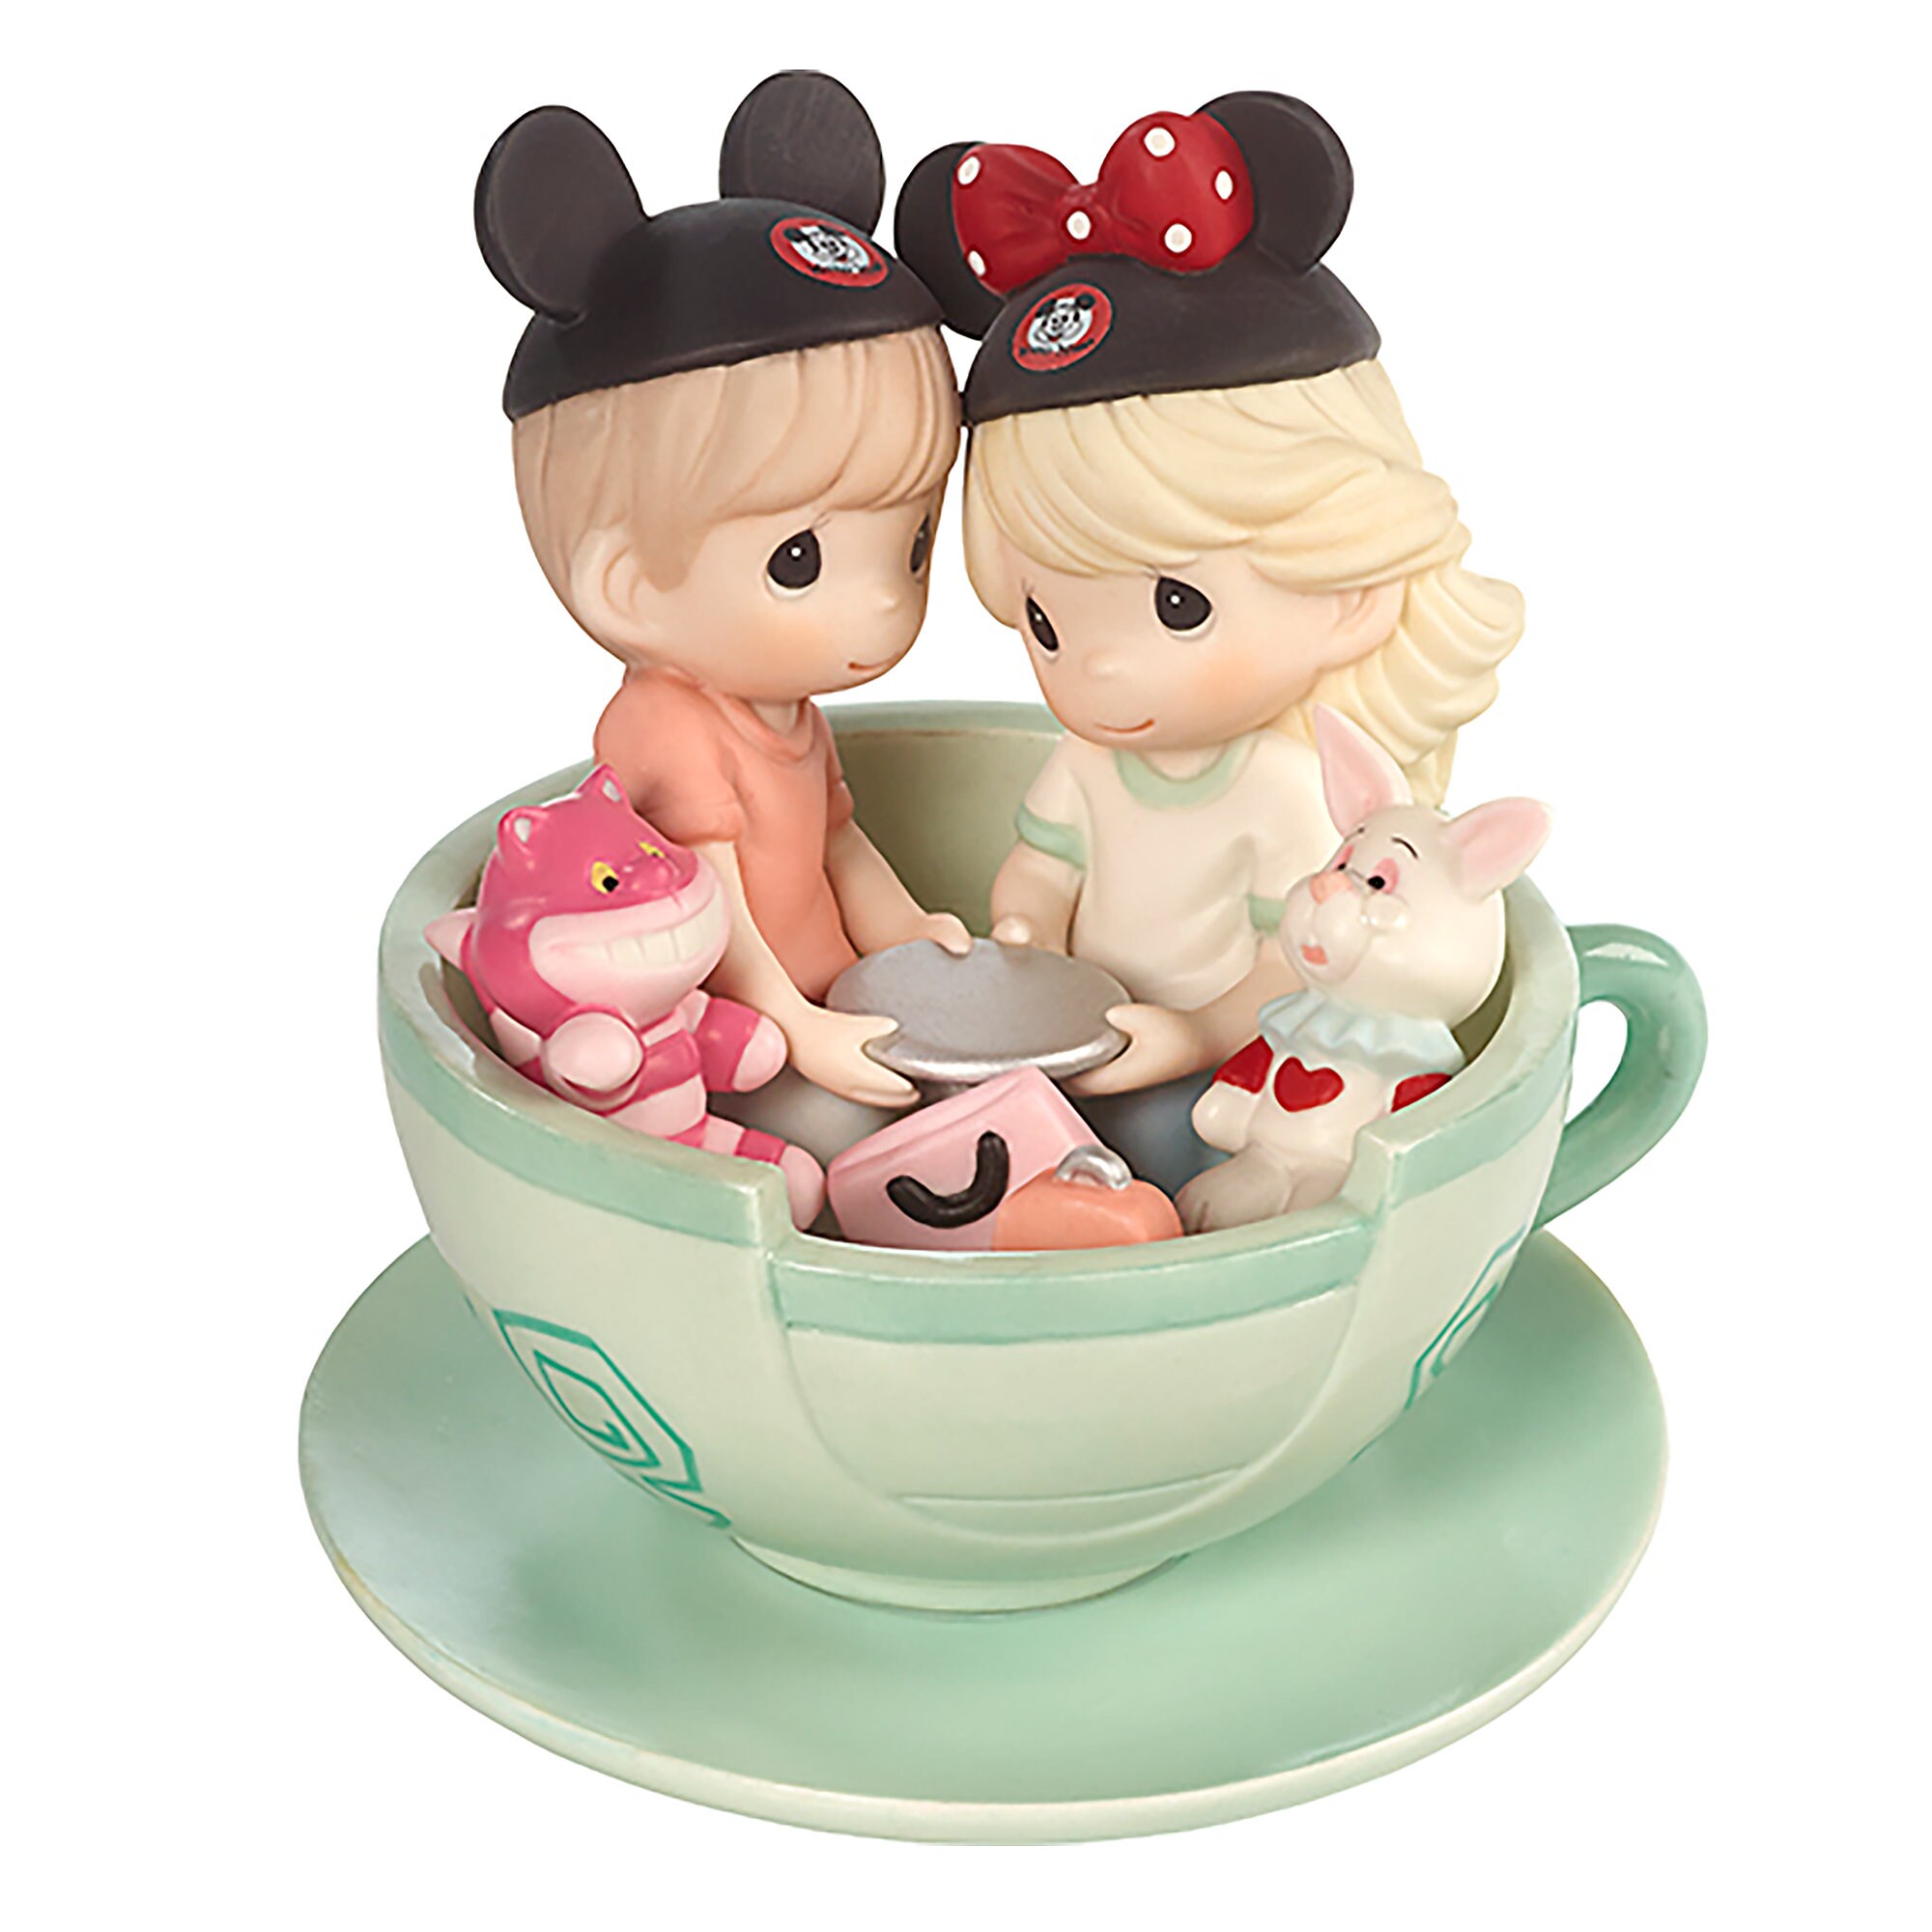 Disney Boy and Girl ''It's a Tea-riffic Day to Be with You'' Figurine - Precious Moments